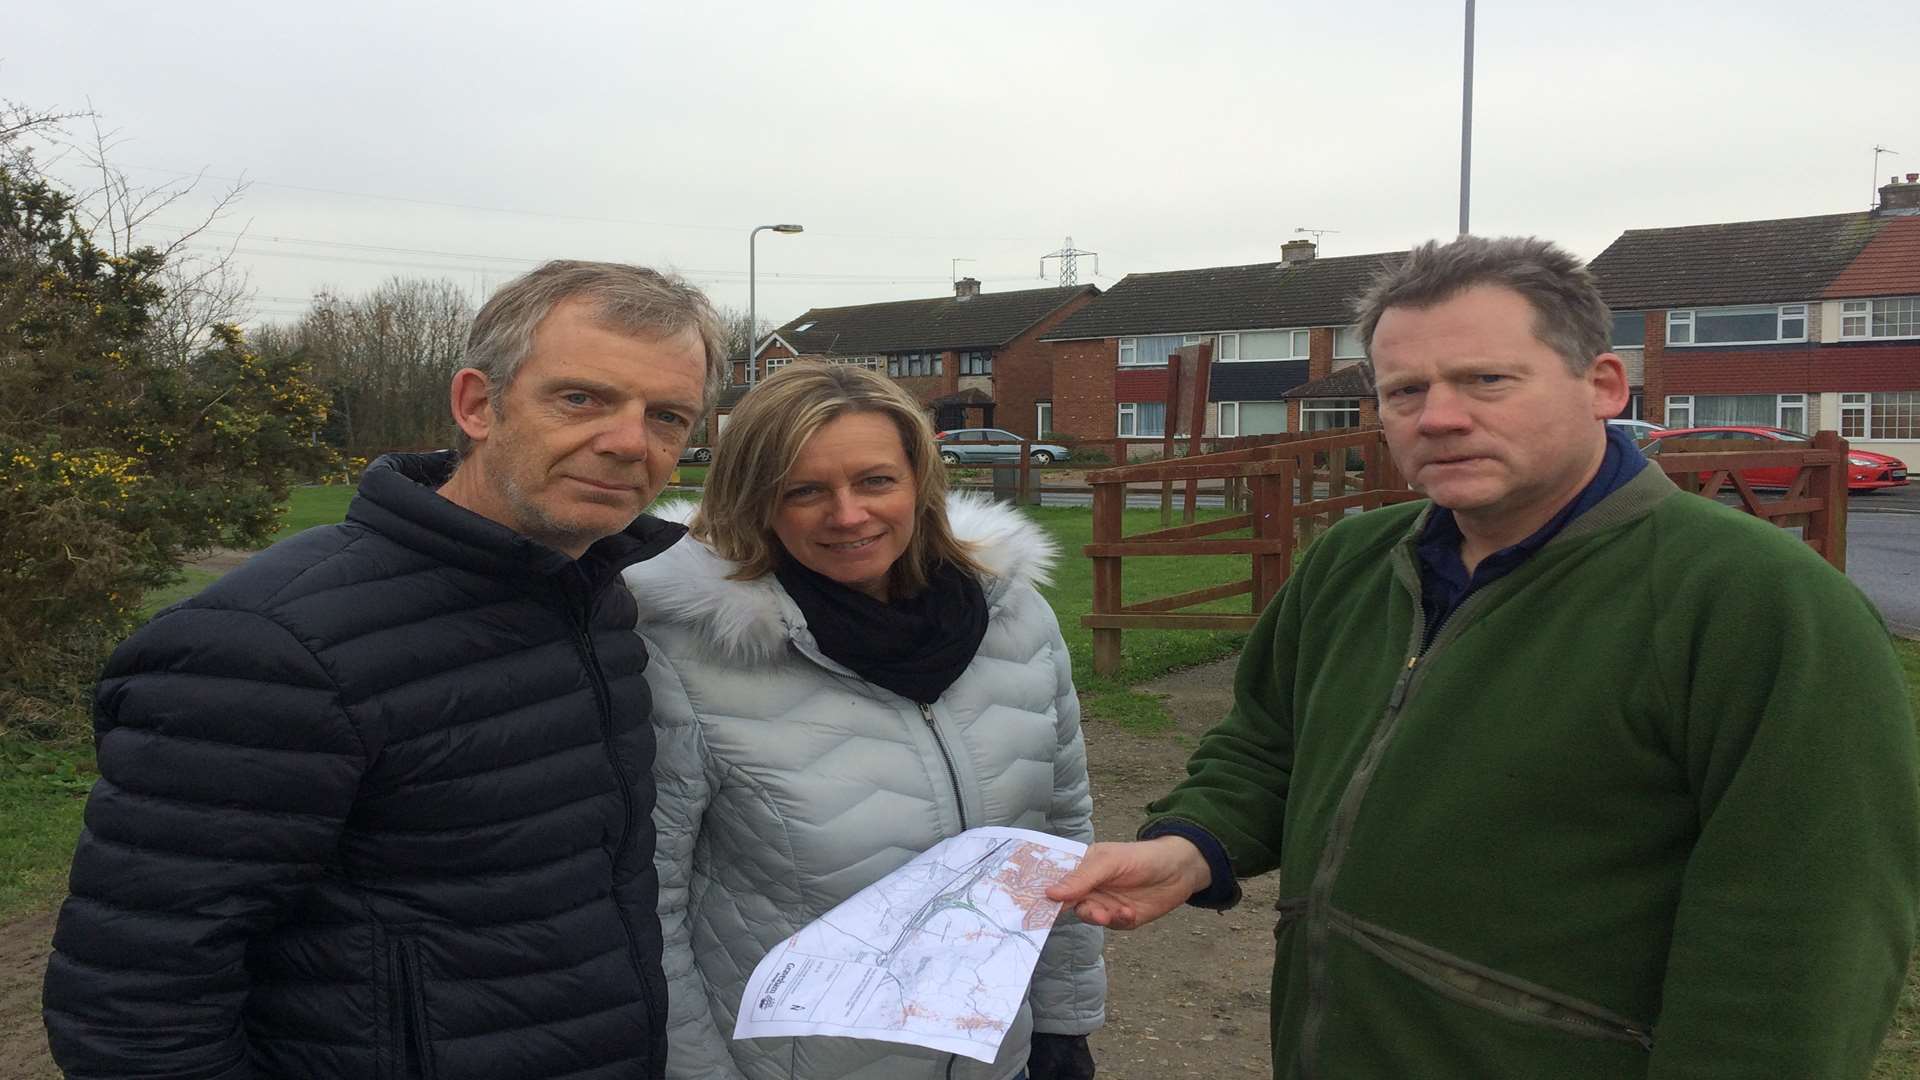 MP Adam Holloway talks to Andrew & Karen Moore about the potential impact of the Lower Thames Crossing